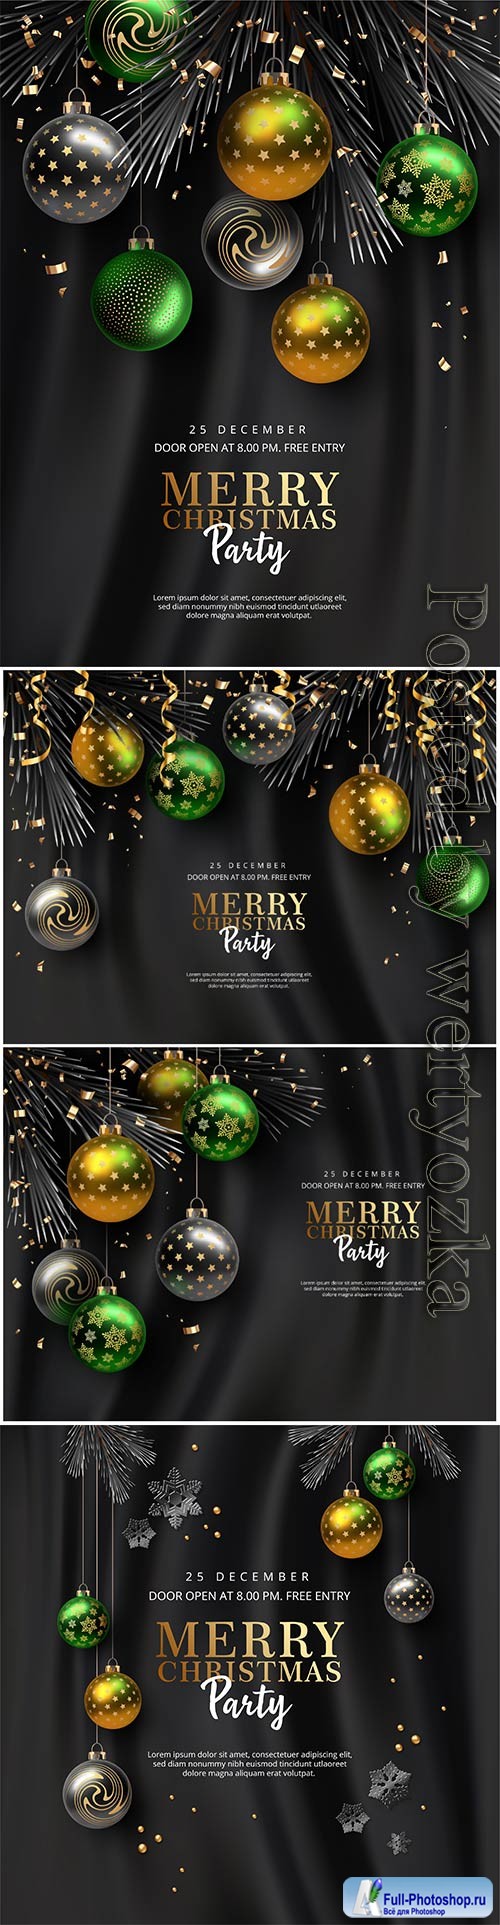 Christmas and new year party vector poster